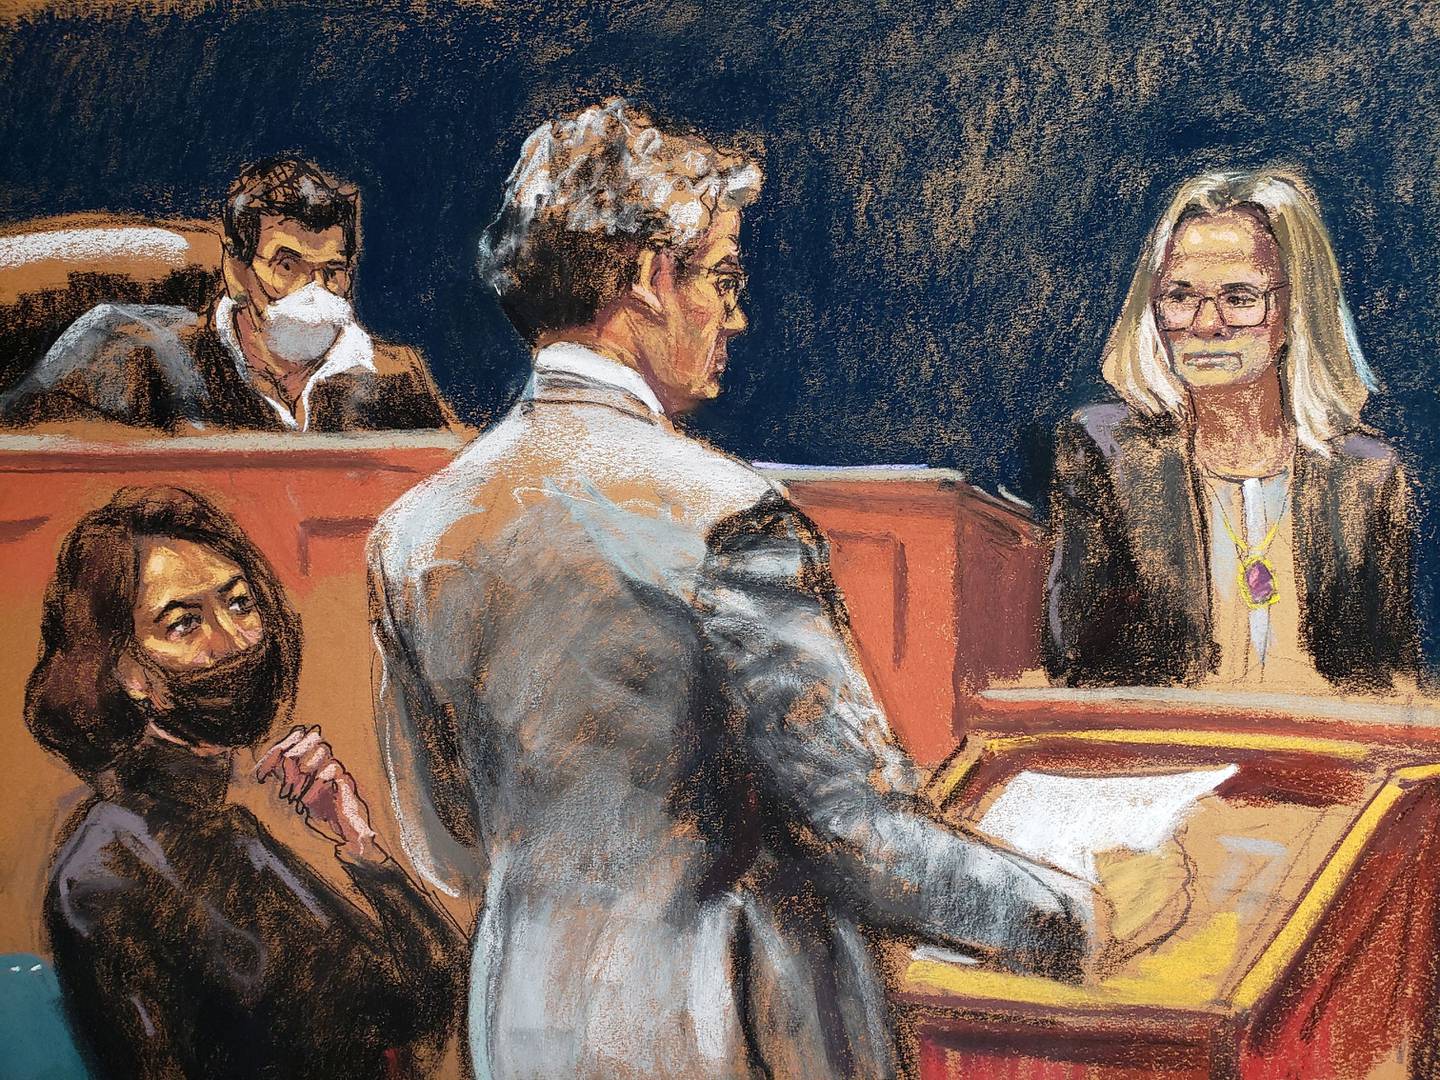 Witness Eva Andersson is questioned by defence lawyer Jeffrey Pagliuca during the trial of Ghislaine Maxwell, the Jeffrey Epstein associate accused of sex trafficking, in a courtroom sketch in New York City. Reuters